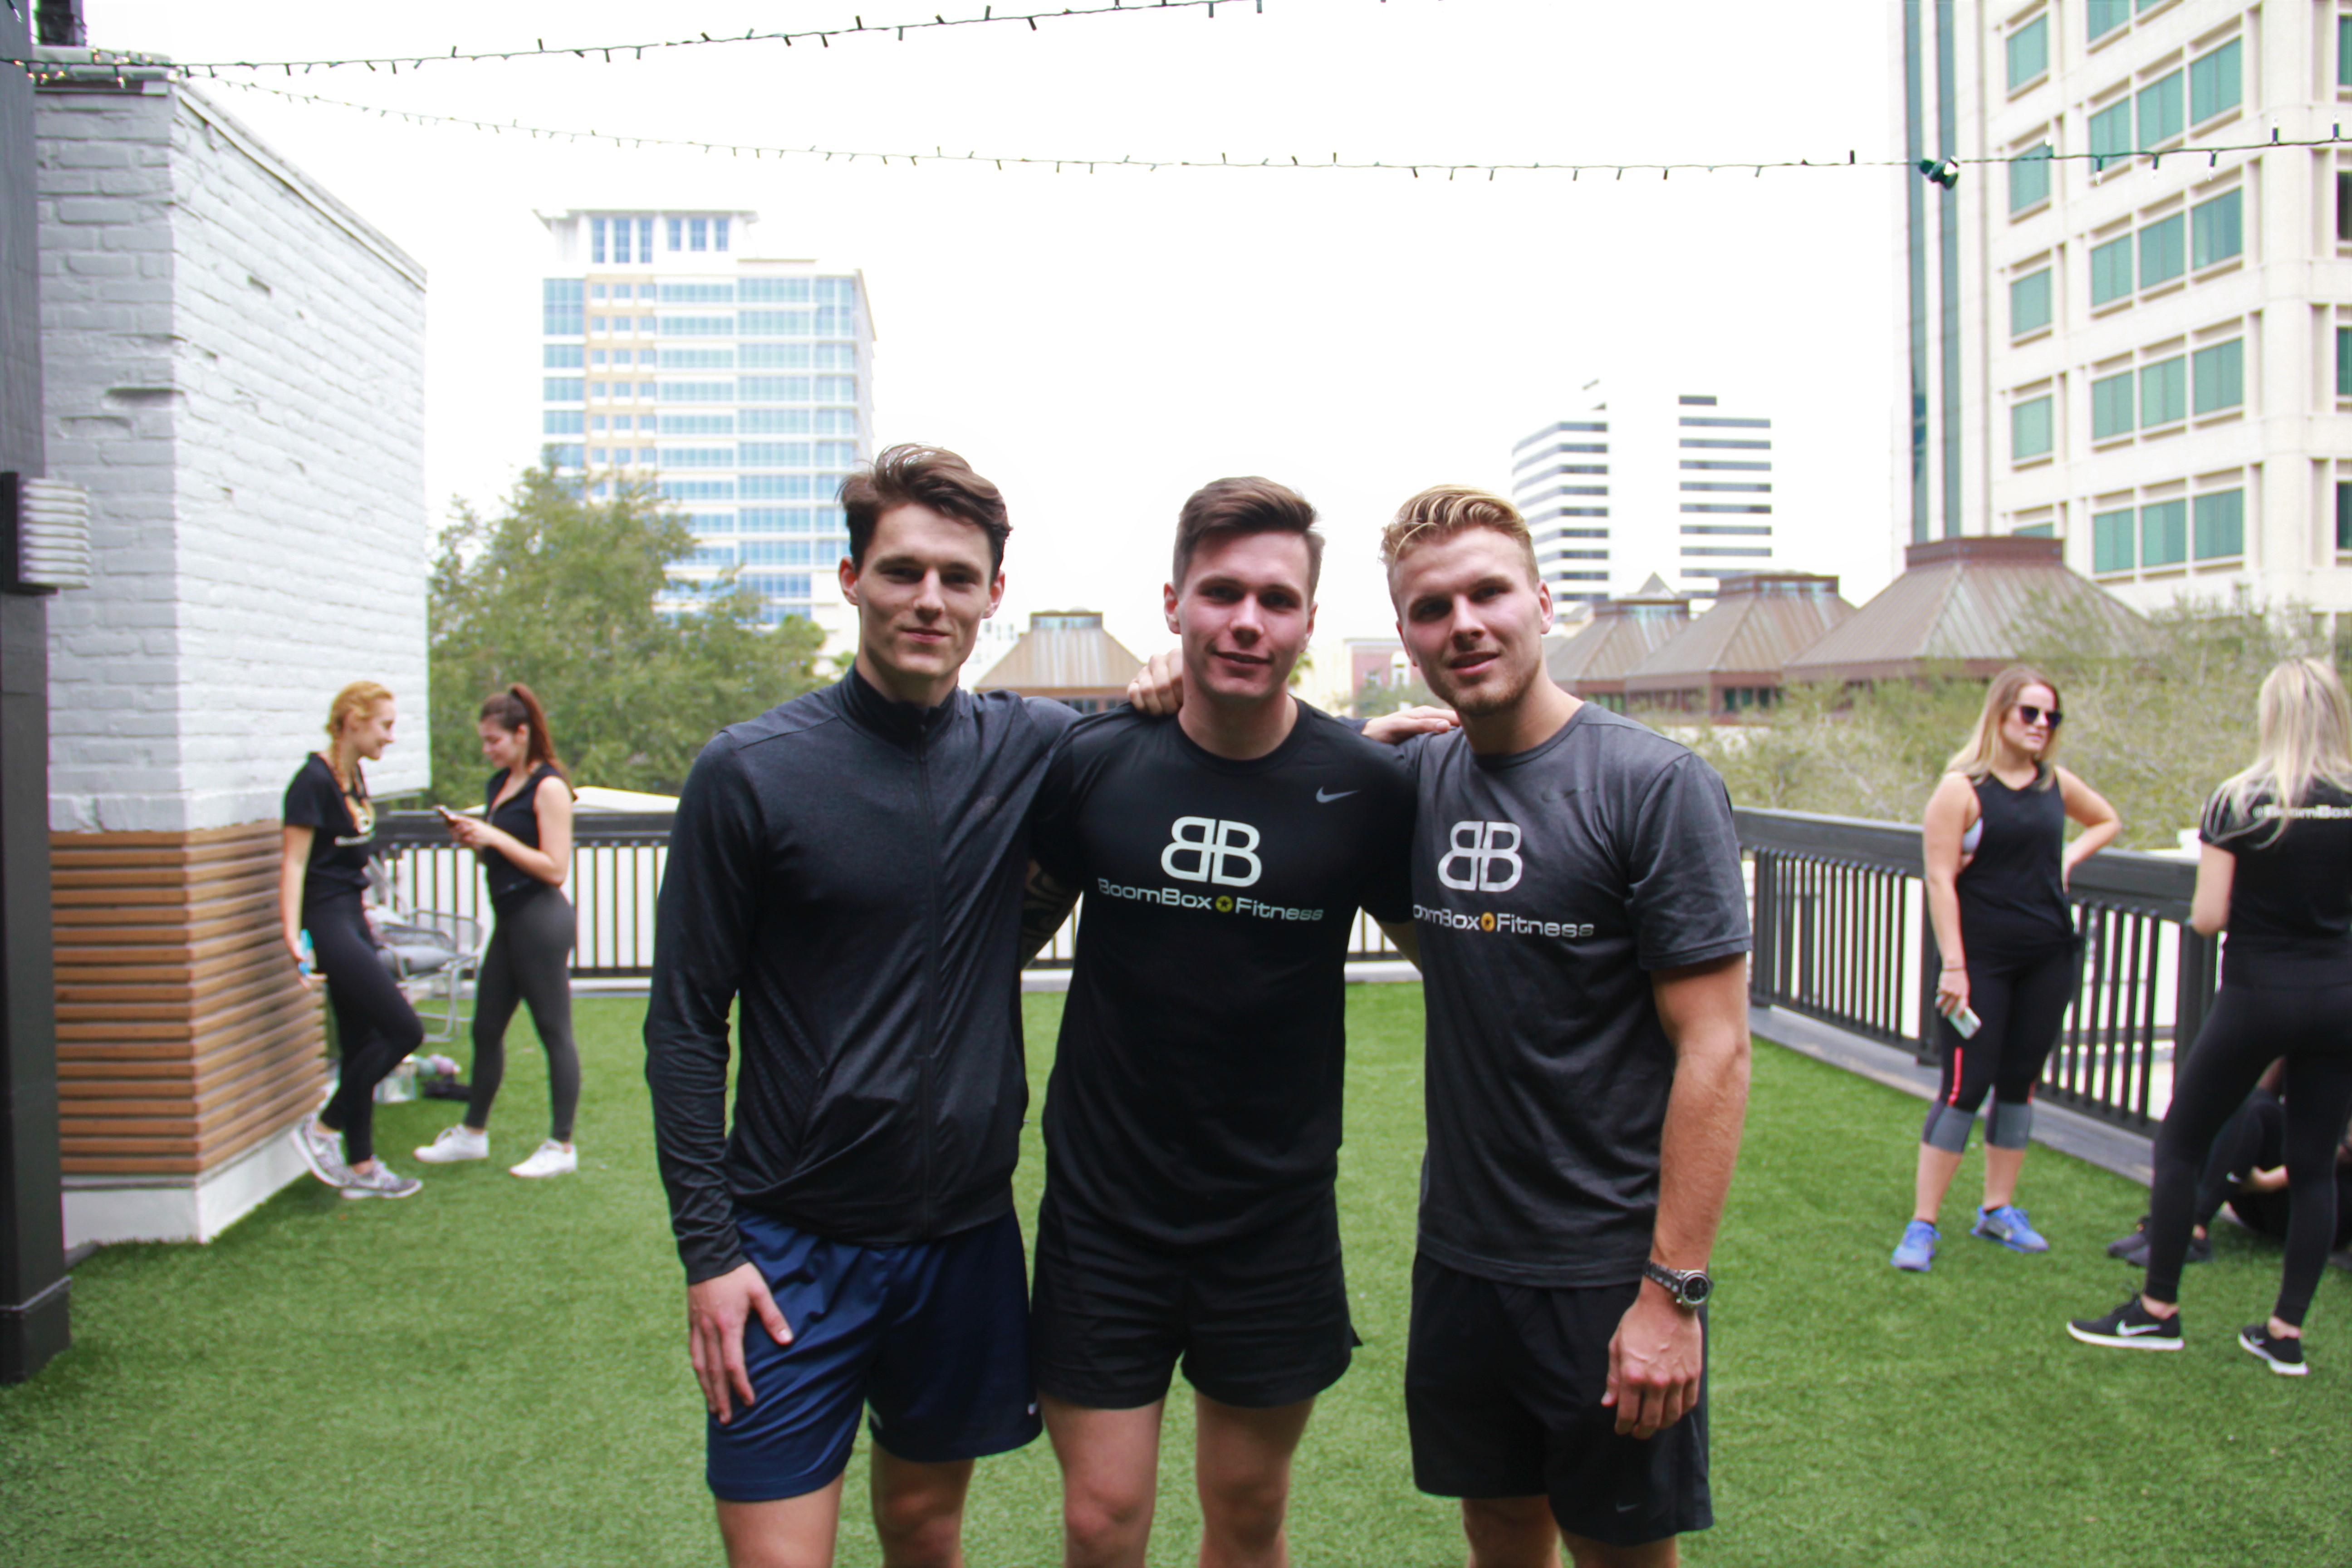 Students create high-intensity workout company